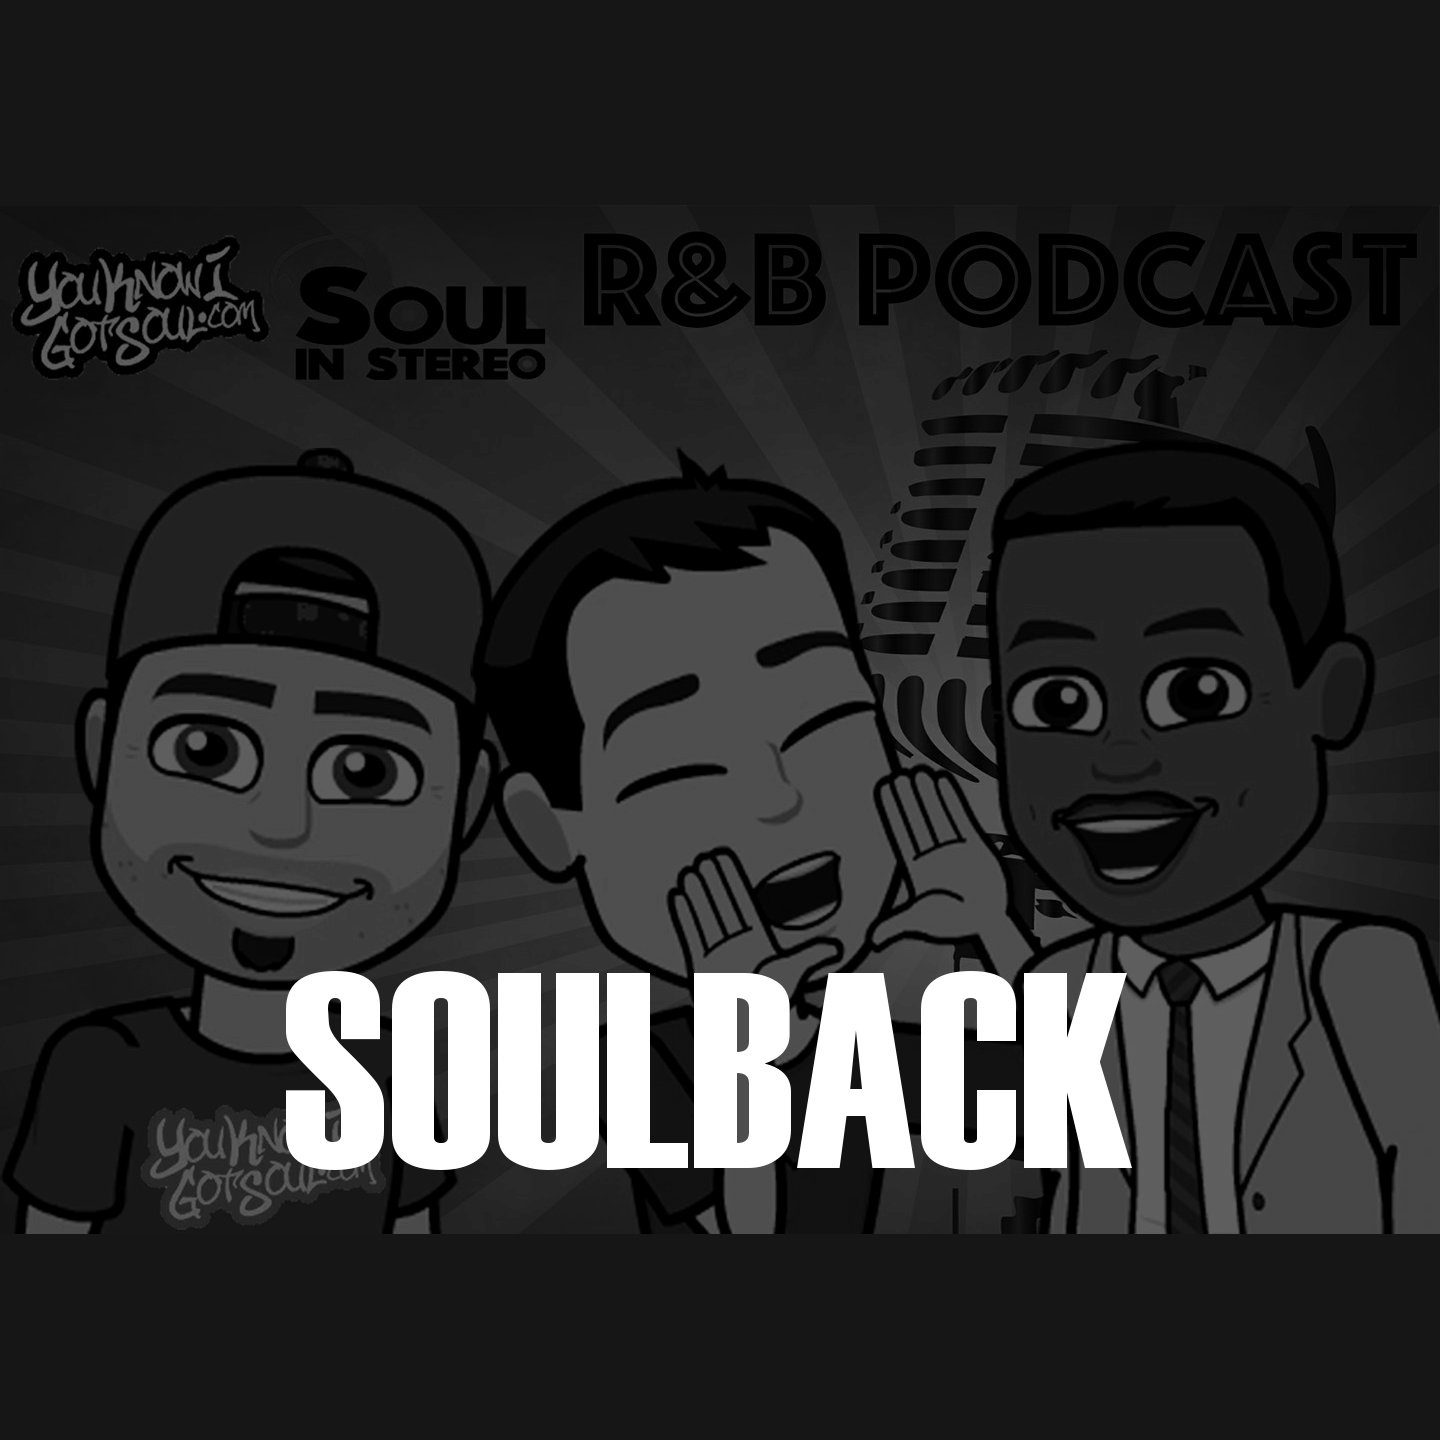 SoulBack (featuring Teedra Moses) - The R&B Podcast Episode 2